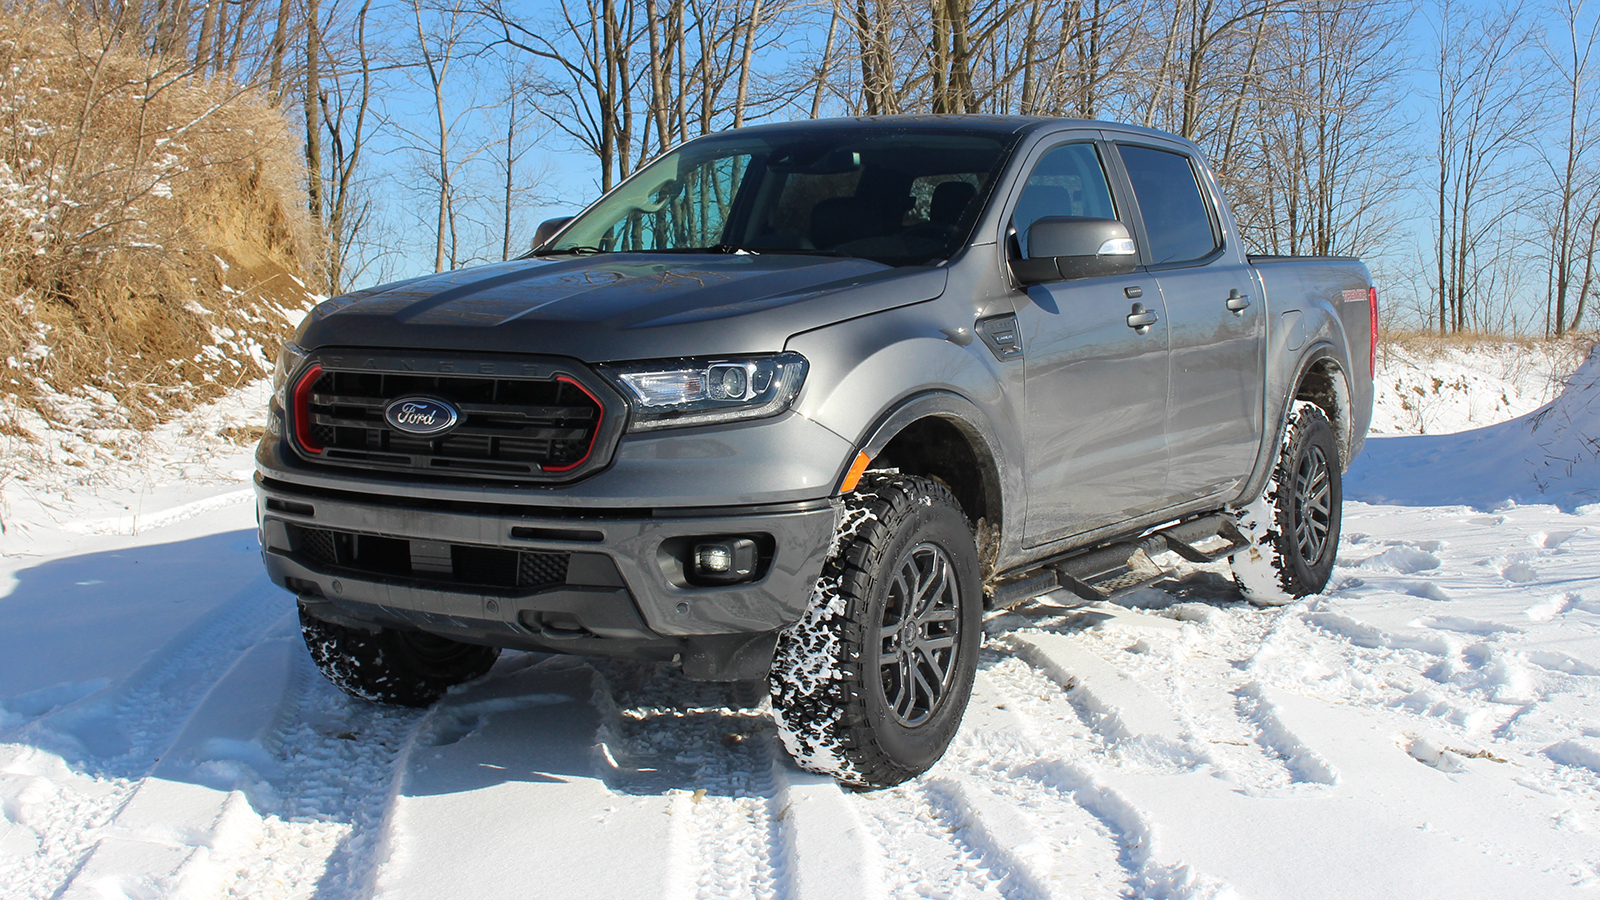 2021 Ford Ranger Tremor First Drive | What's new, off-roading, features